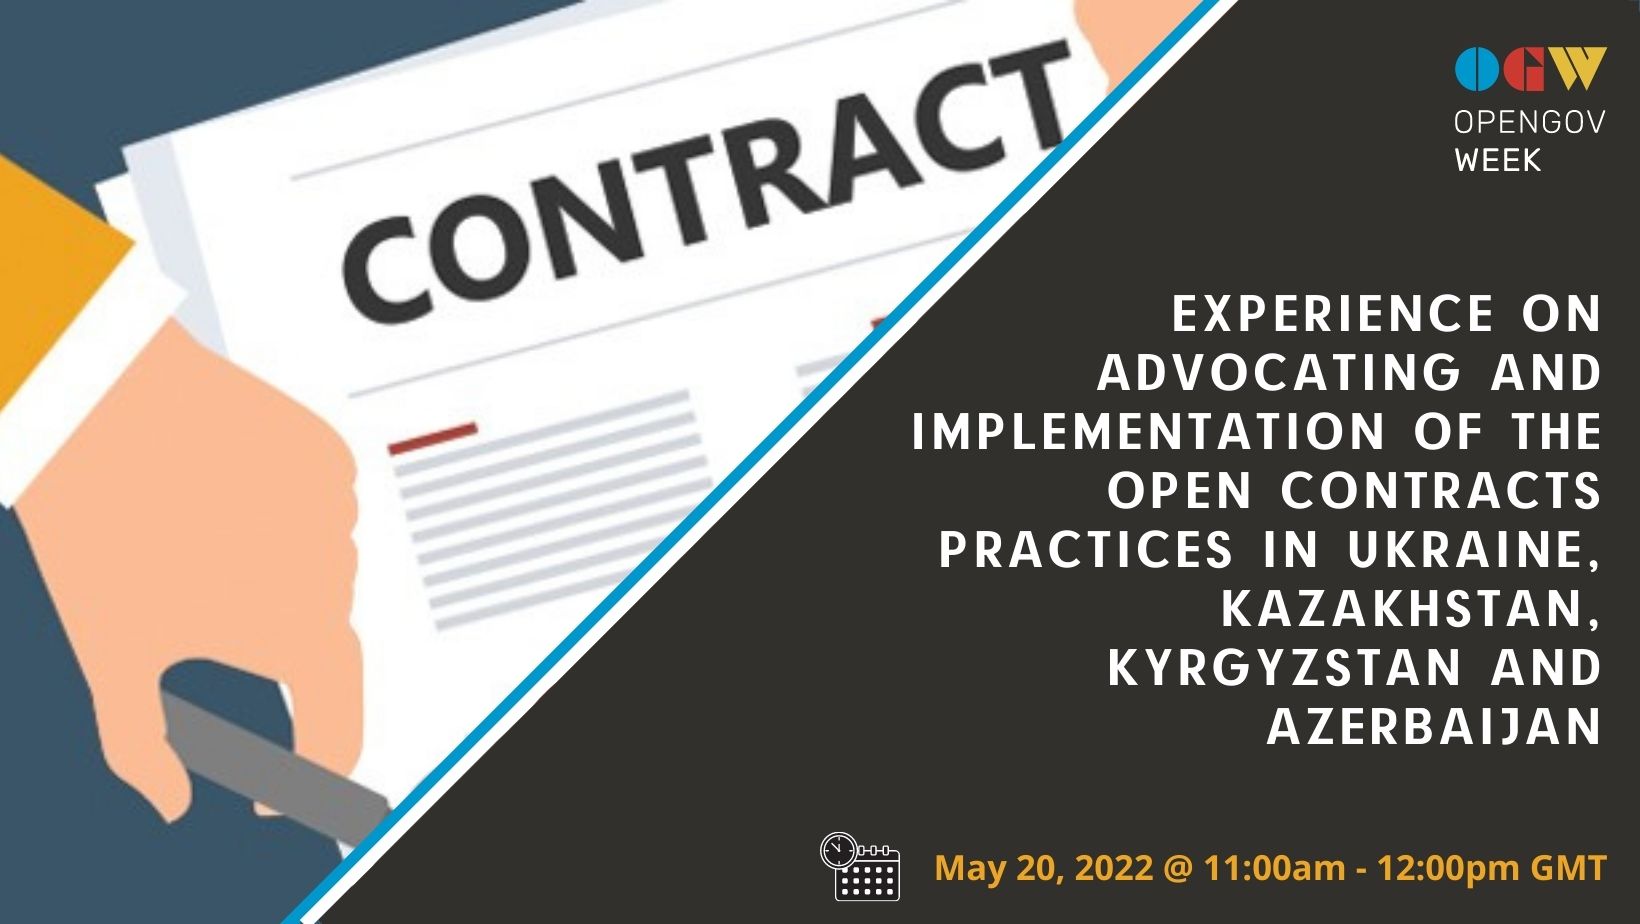 Experience on advocating and implementation of the open contracts practices in Ukraine, Kazakhstan, Kyrgyzstan and Azerbaijan